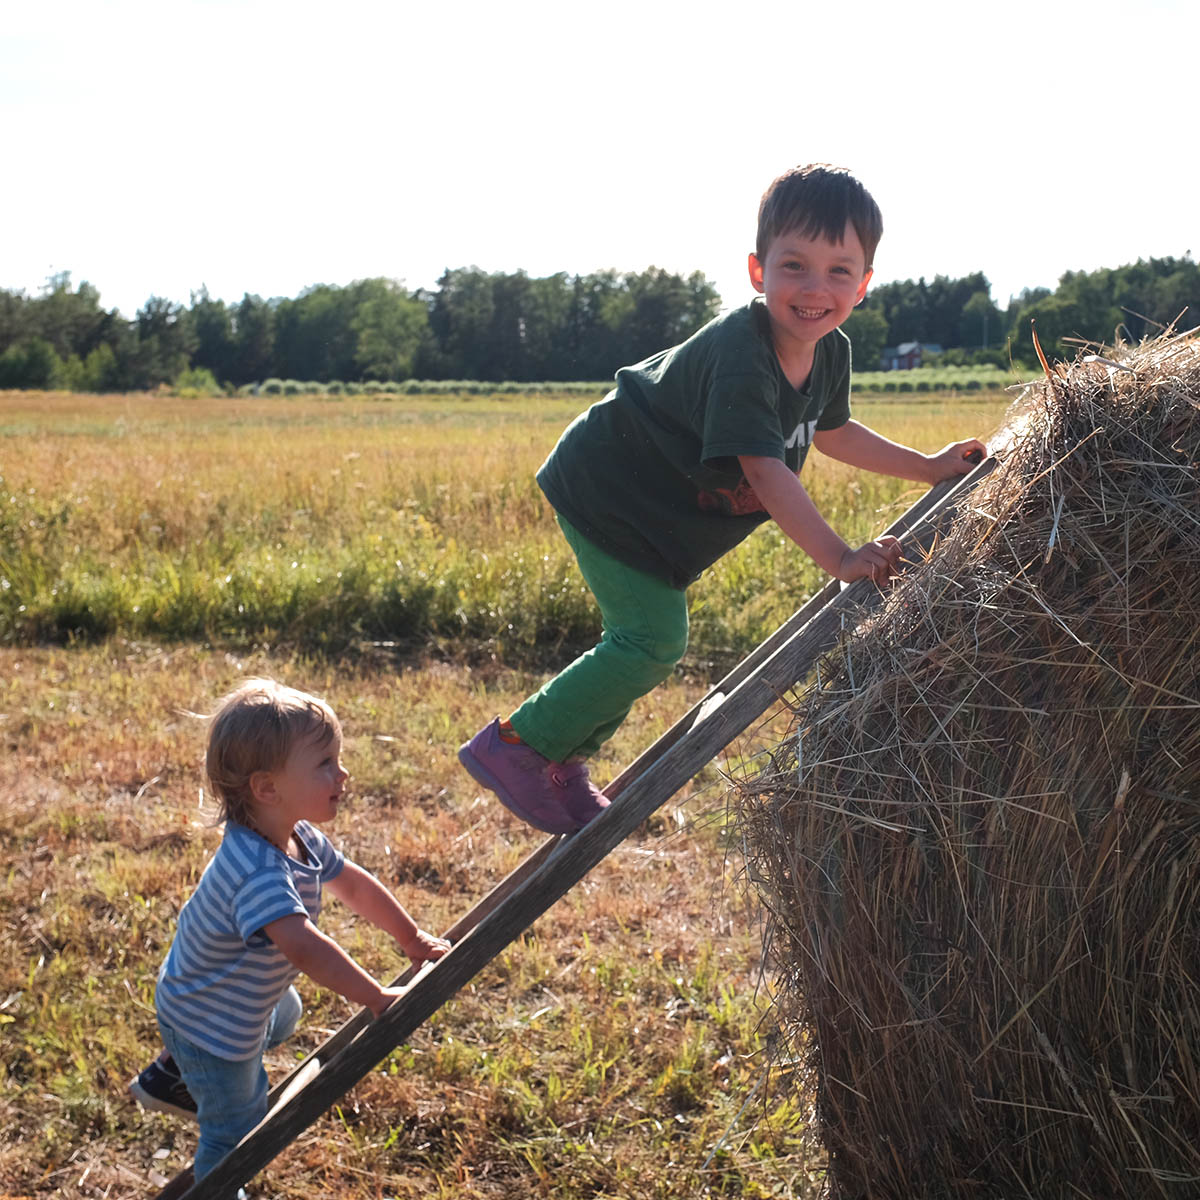 Two children playing on a hay bale